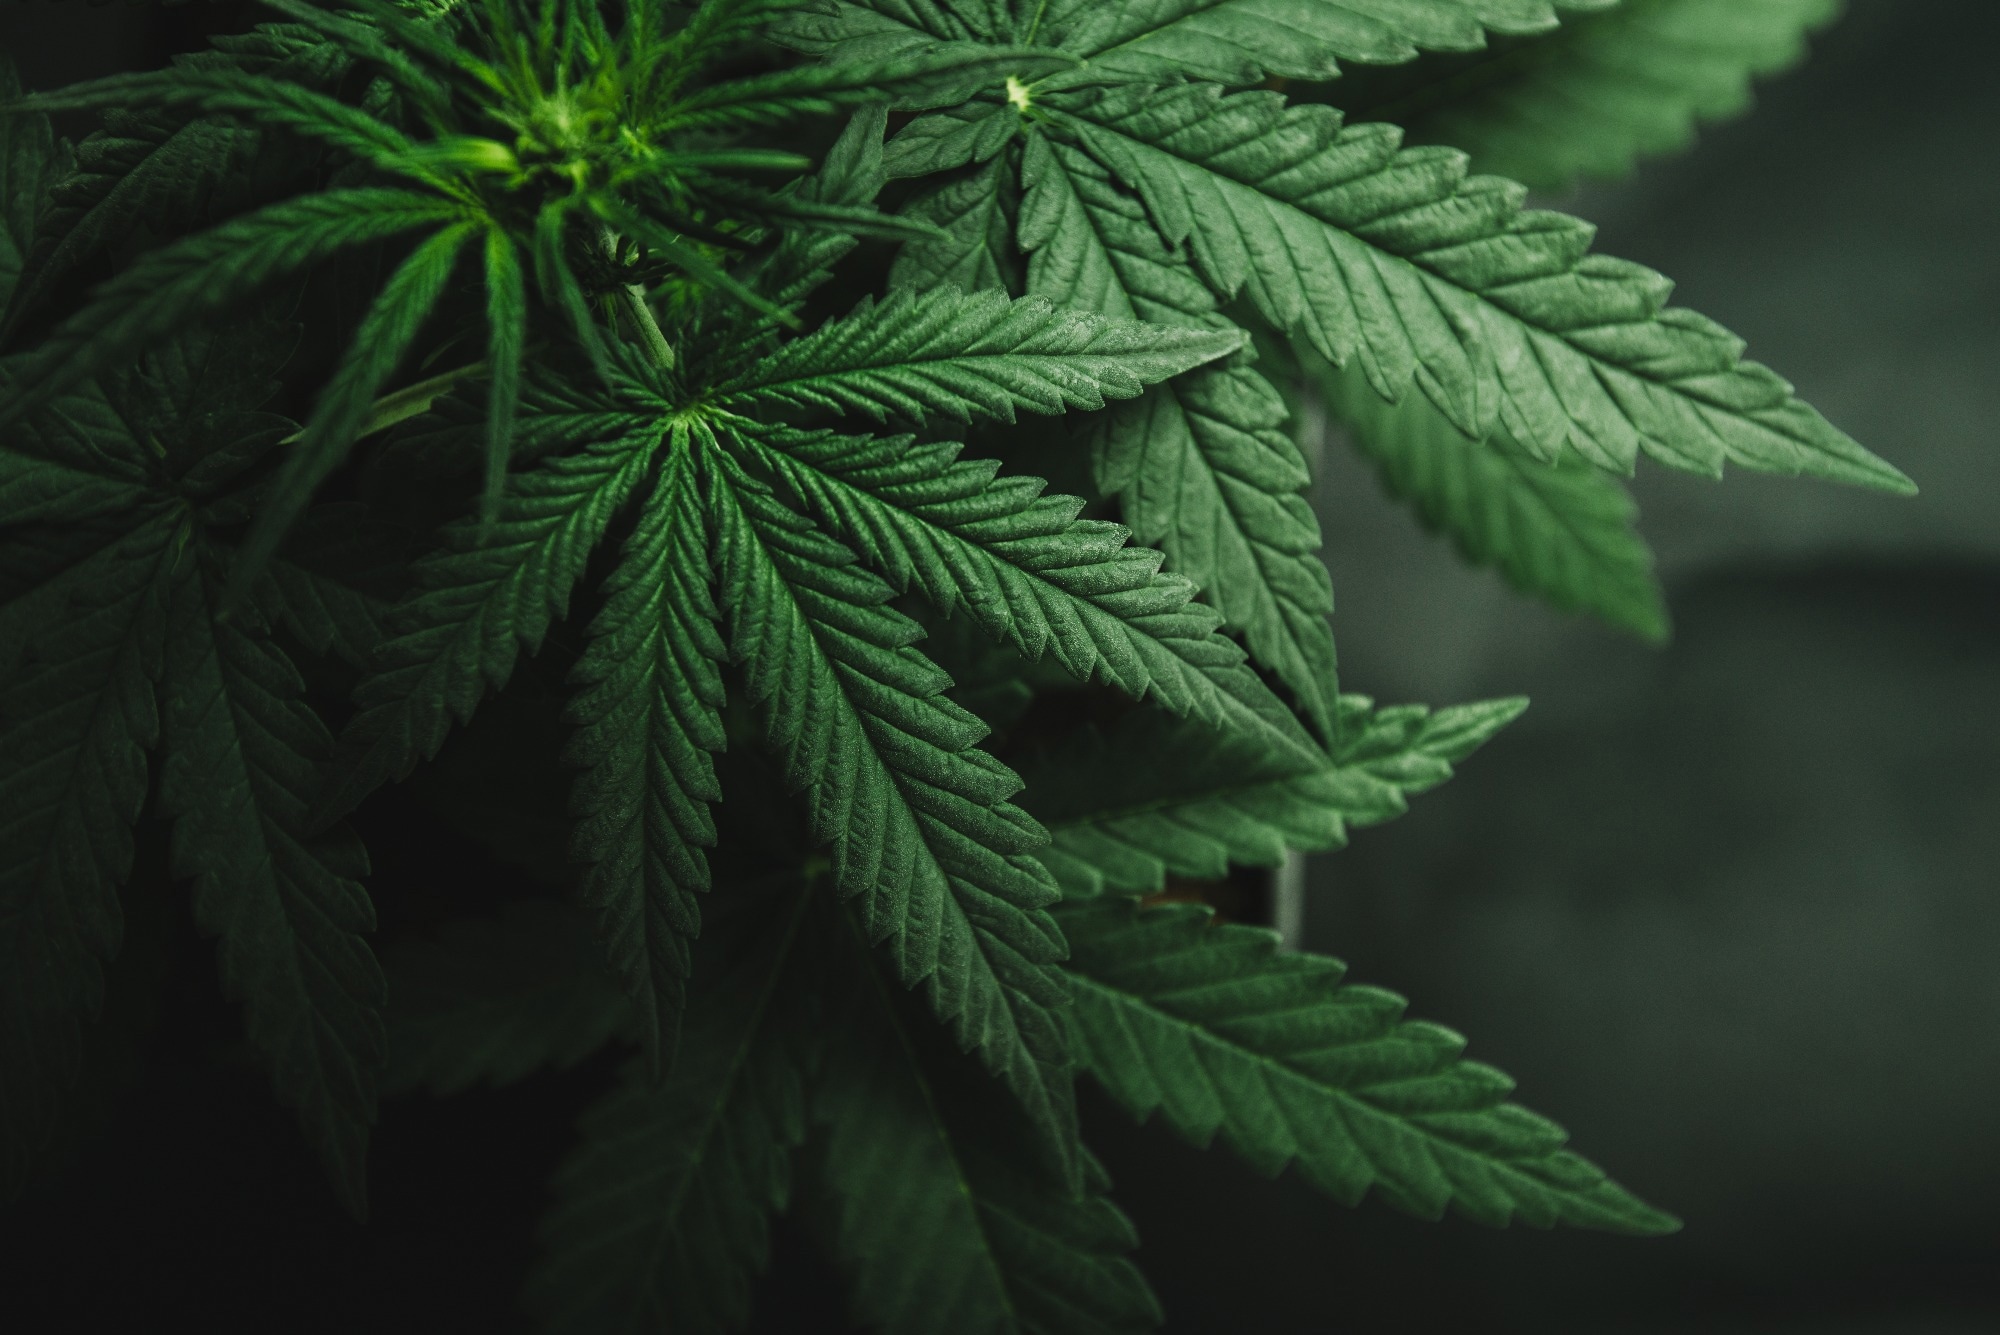 Study: Cannabis-Involved Traffic Injury Emergency Department Visits After Cannabis Legalization and Commercialization. Image Credit: Yarygin/Shutterstock.com